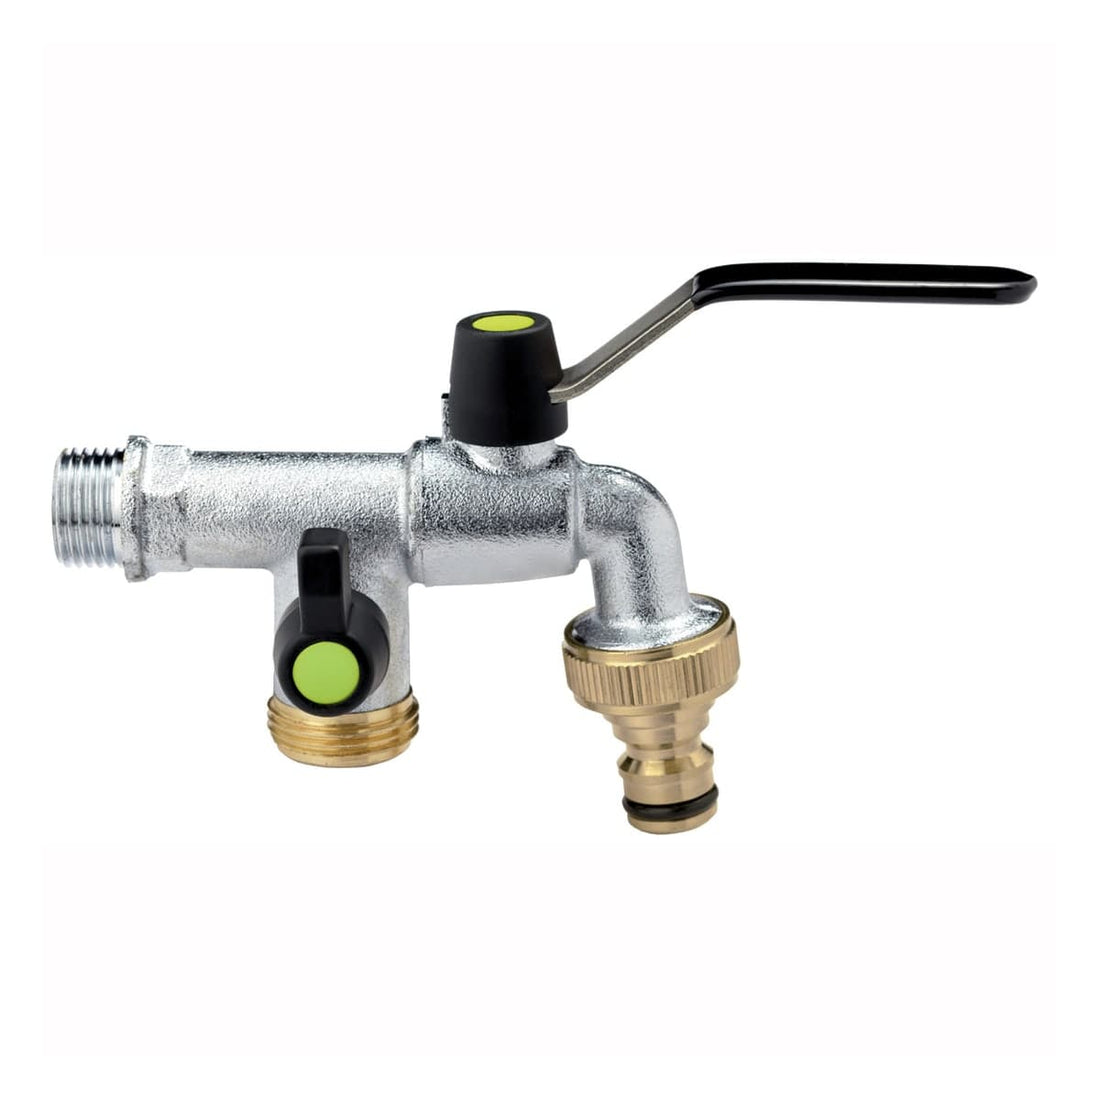 GARDEN BALL VALVE WITH 2 OUTLETS - best price from Maltashopper.com BR500413048